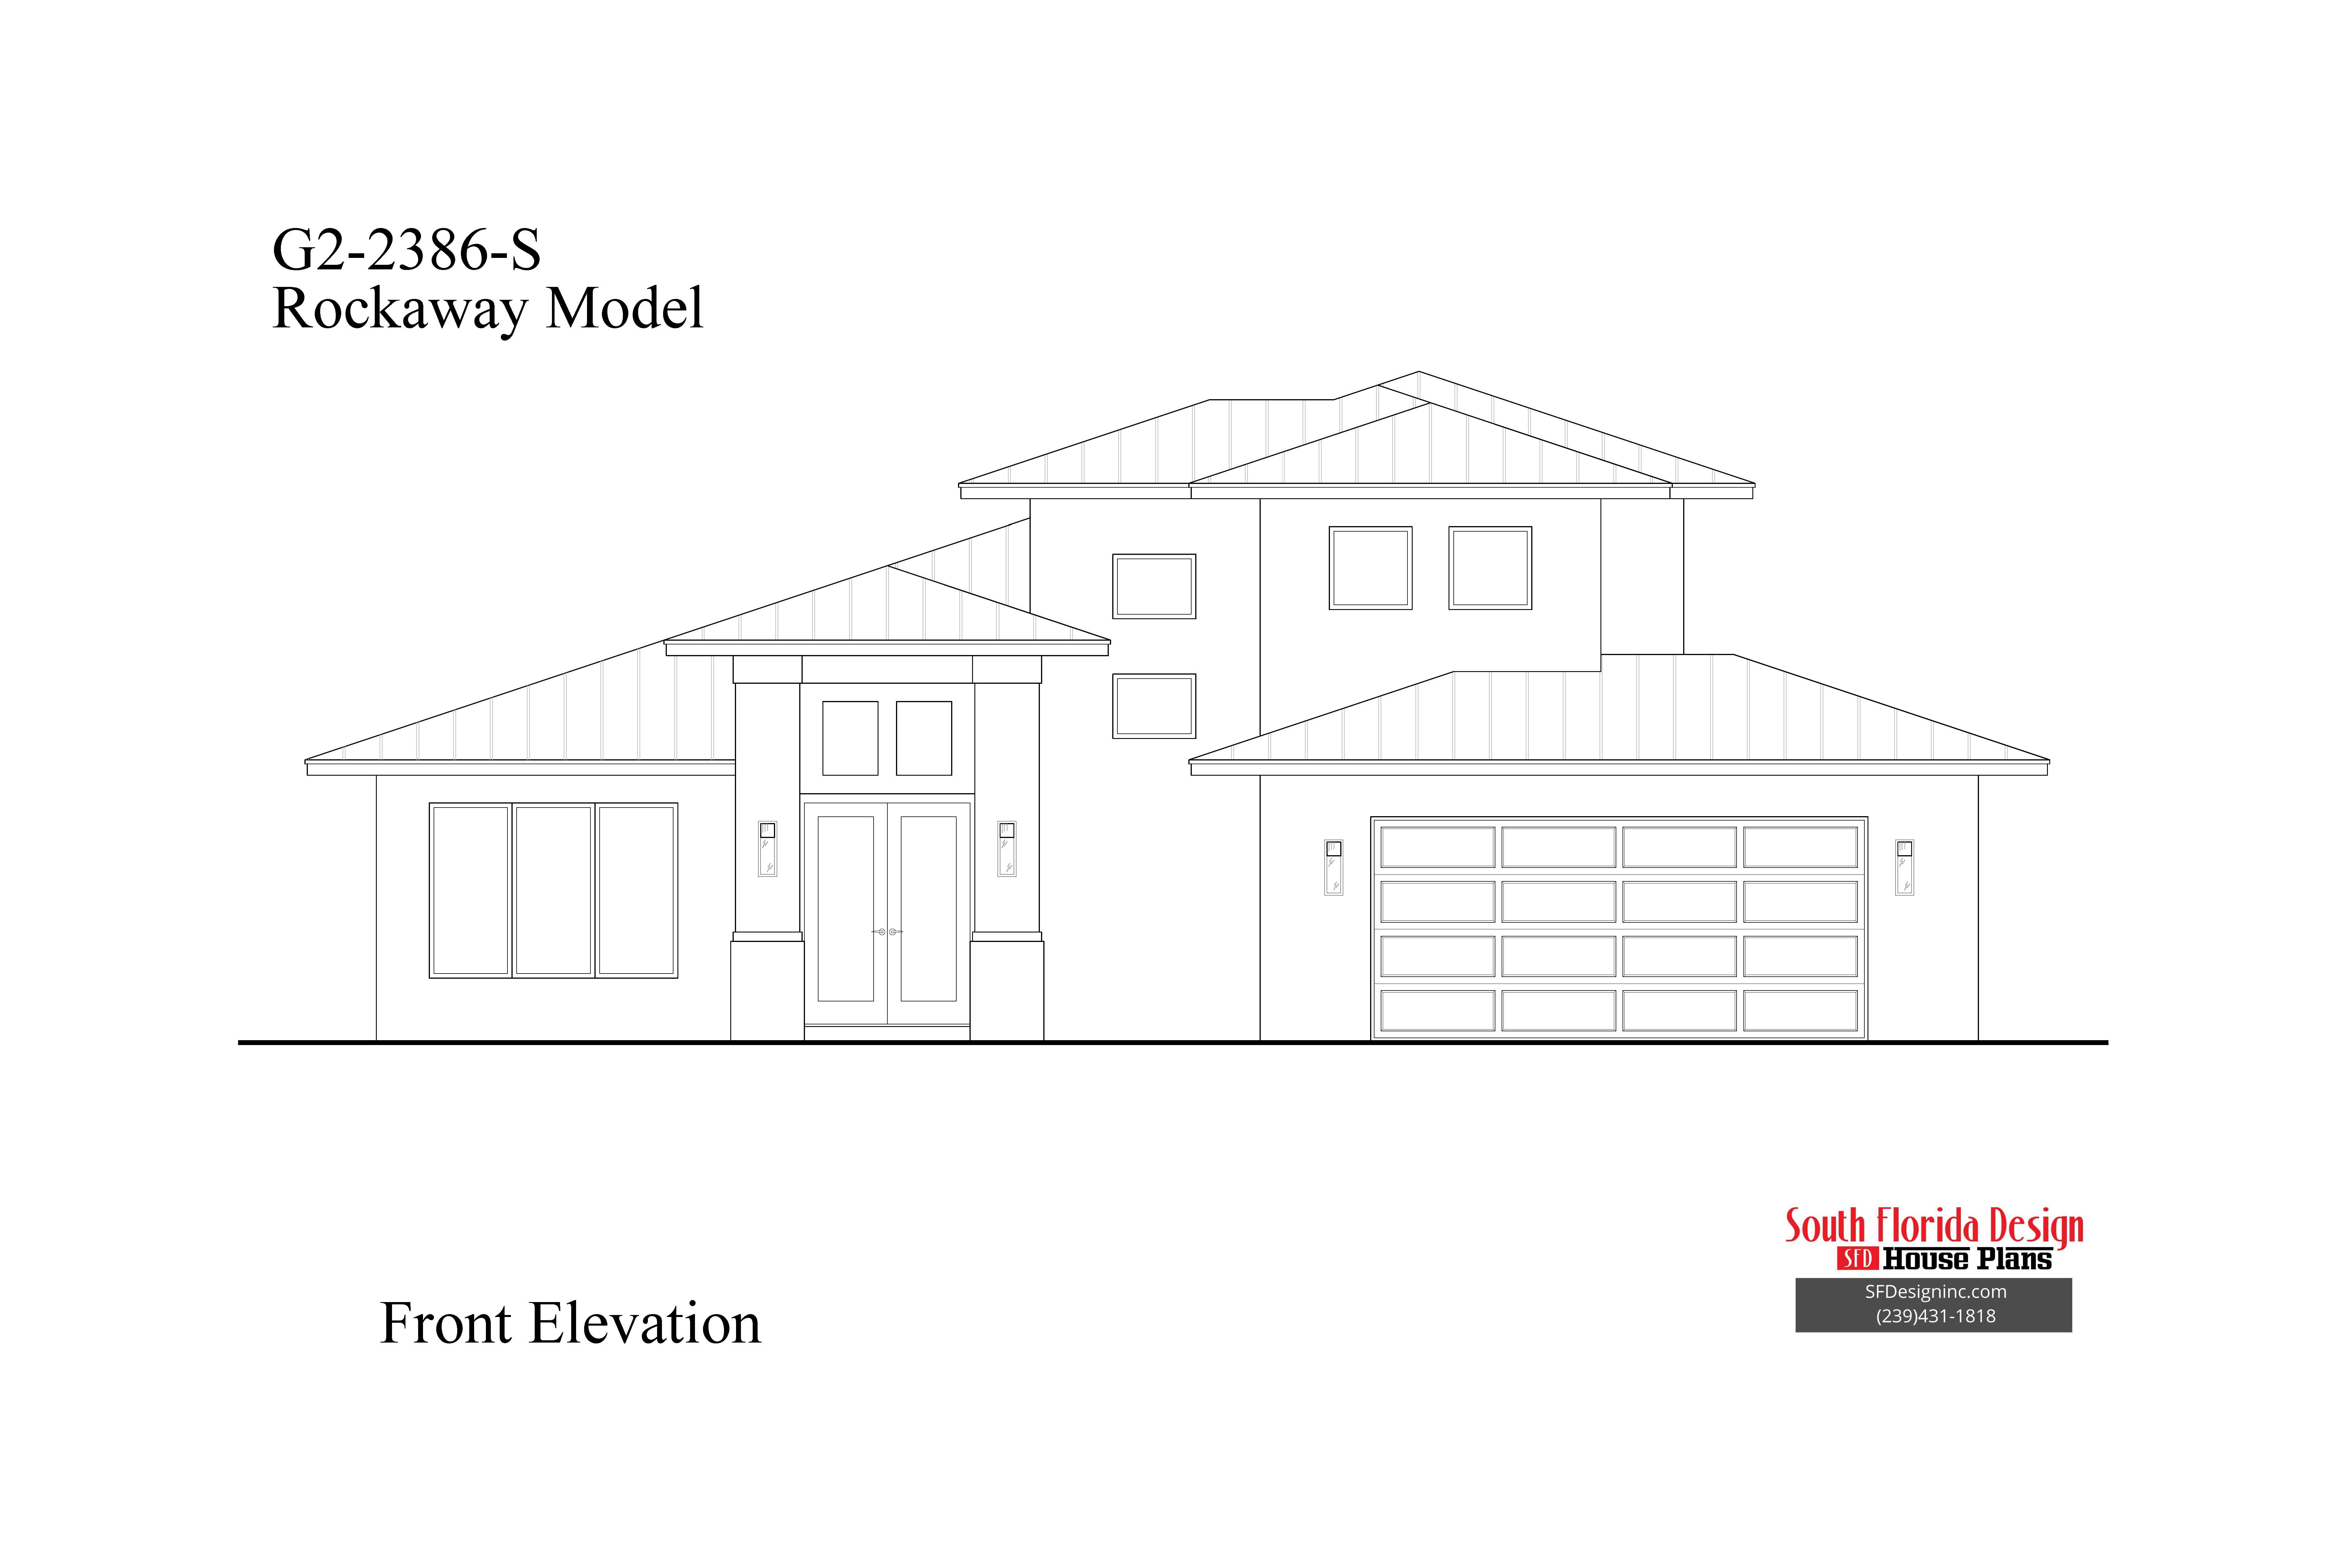 Black and white front elevation sketch of a 2-story front elevation house plan